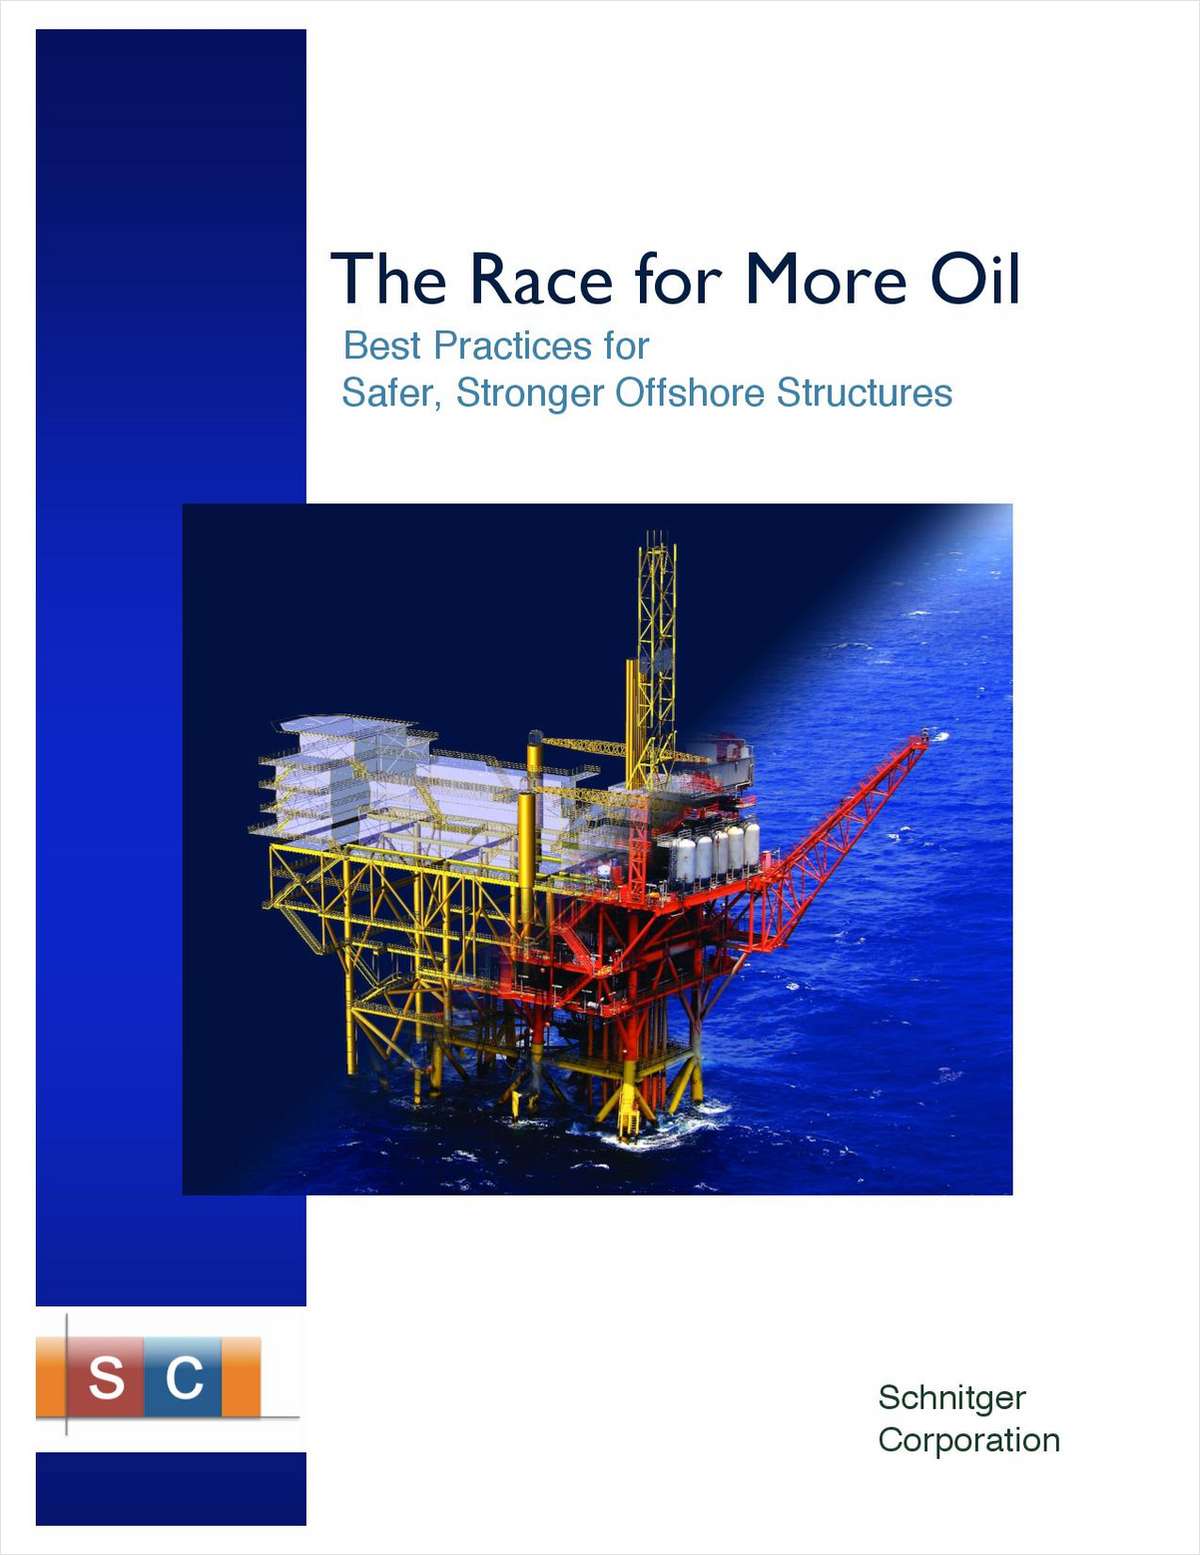 The Race for More Oil: Best Practices for Safer, Stronger Offshore Structures